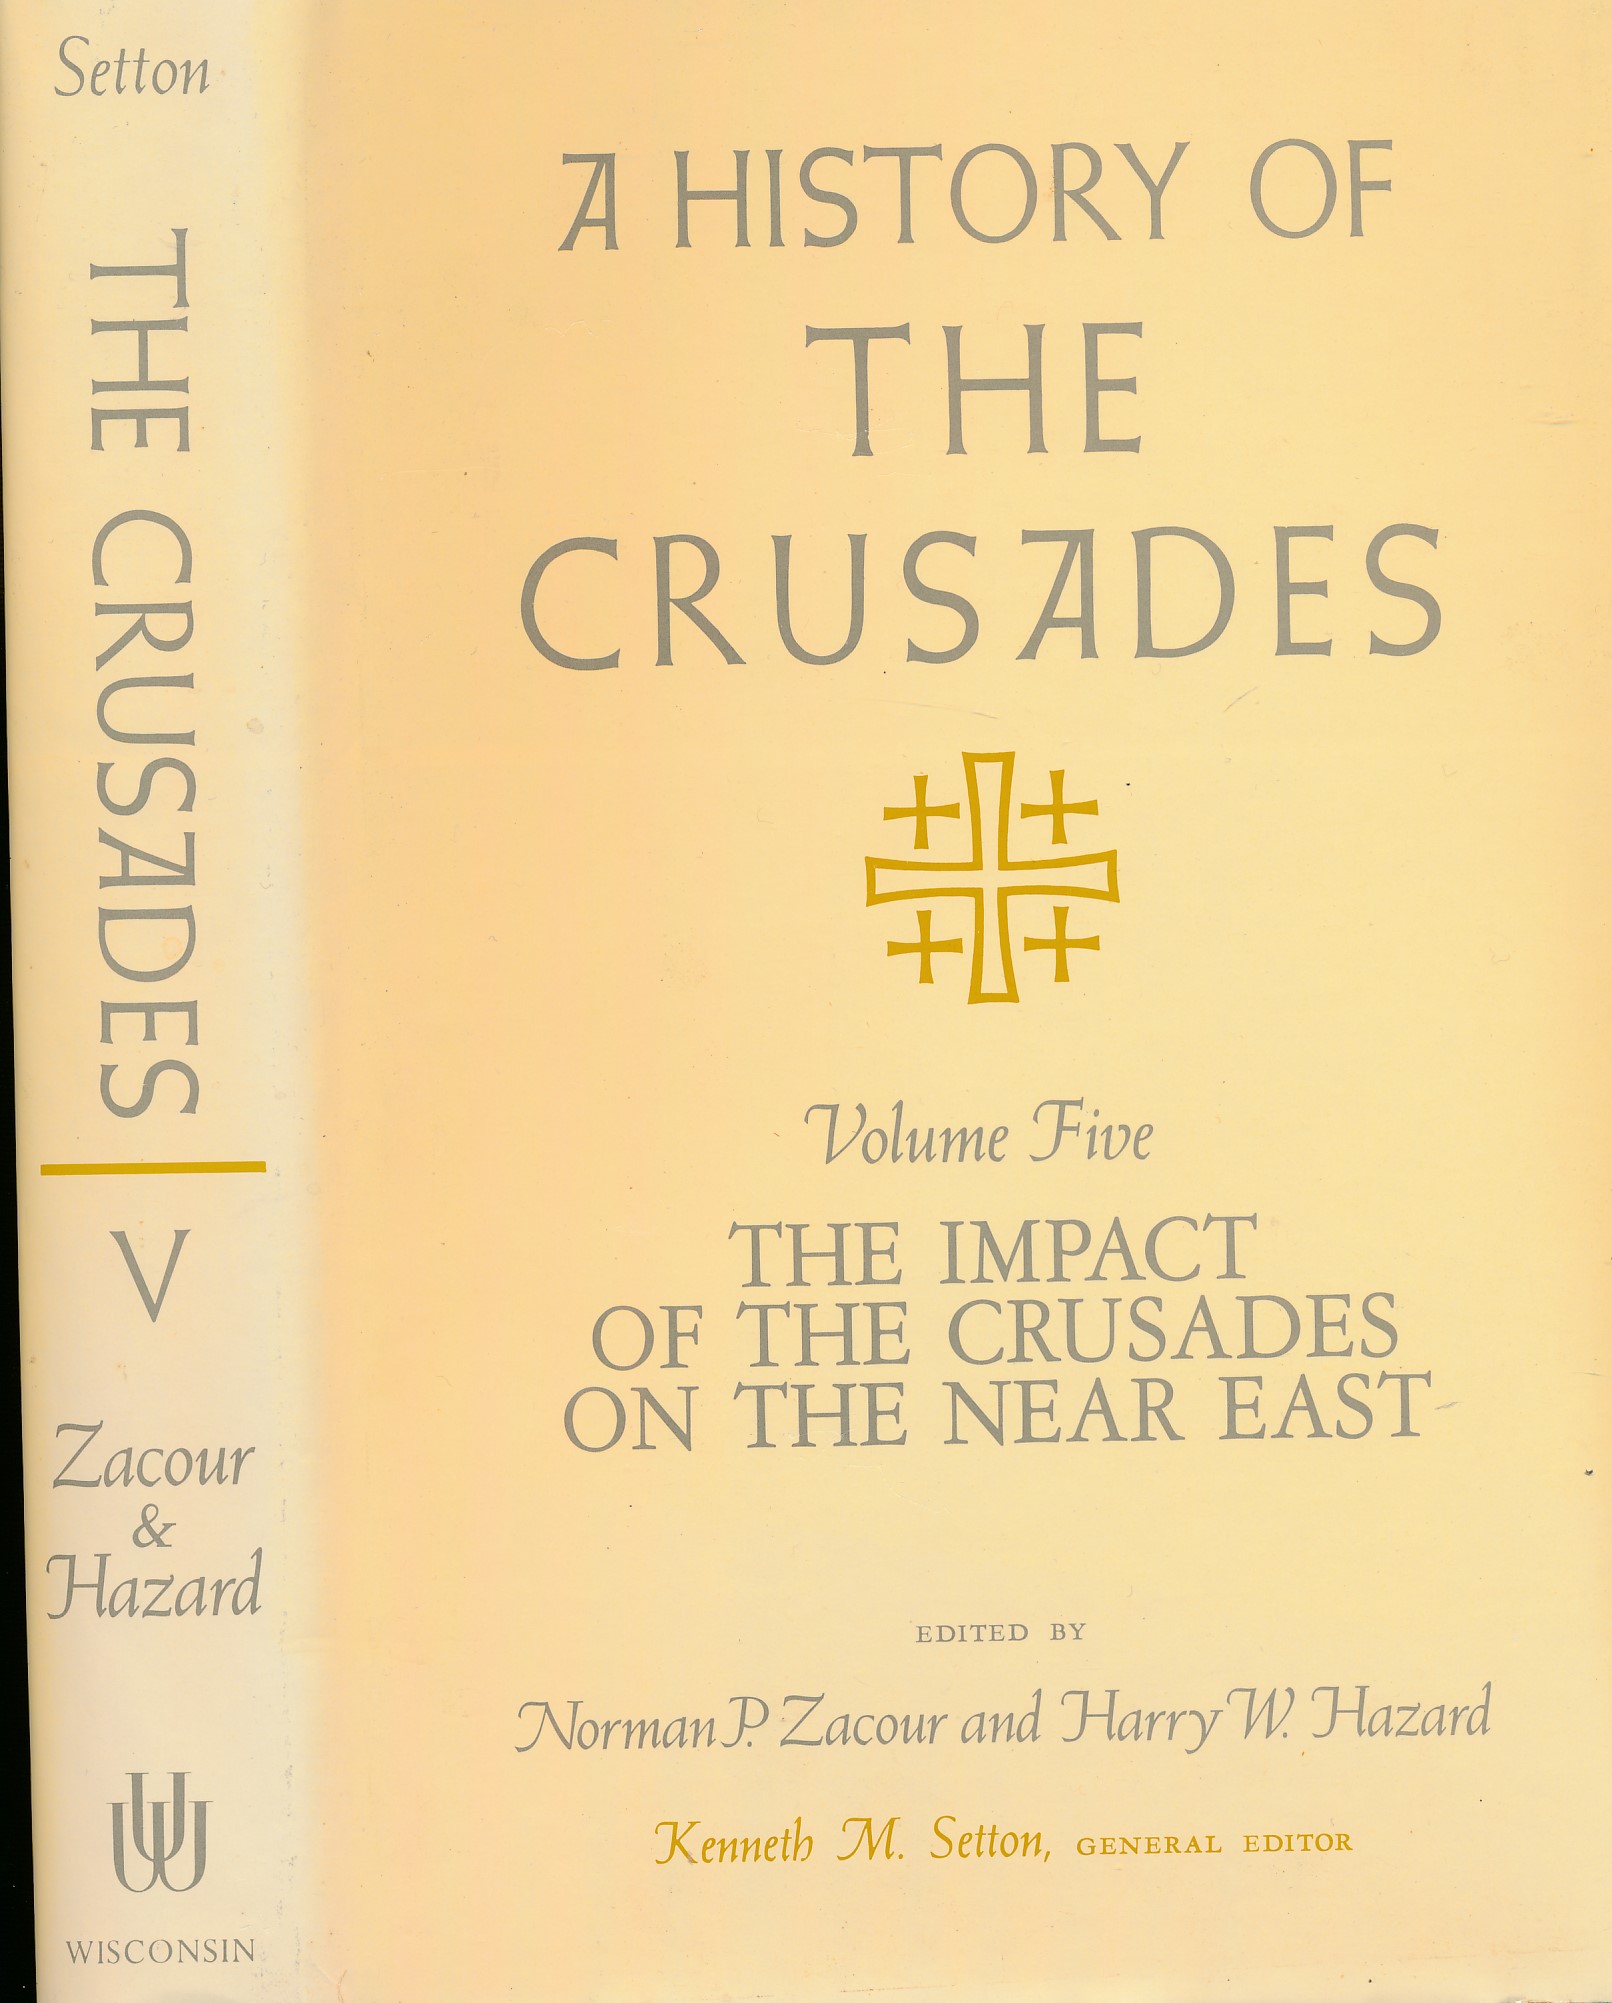 A History of the Crusades. Volume Five. The Impact of the Crusades in the Near East